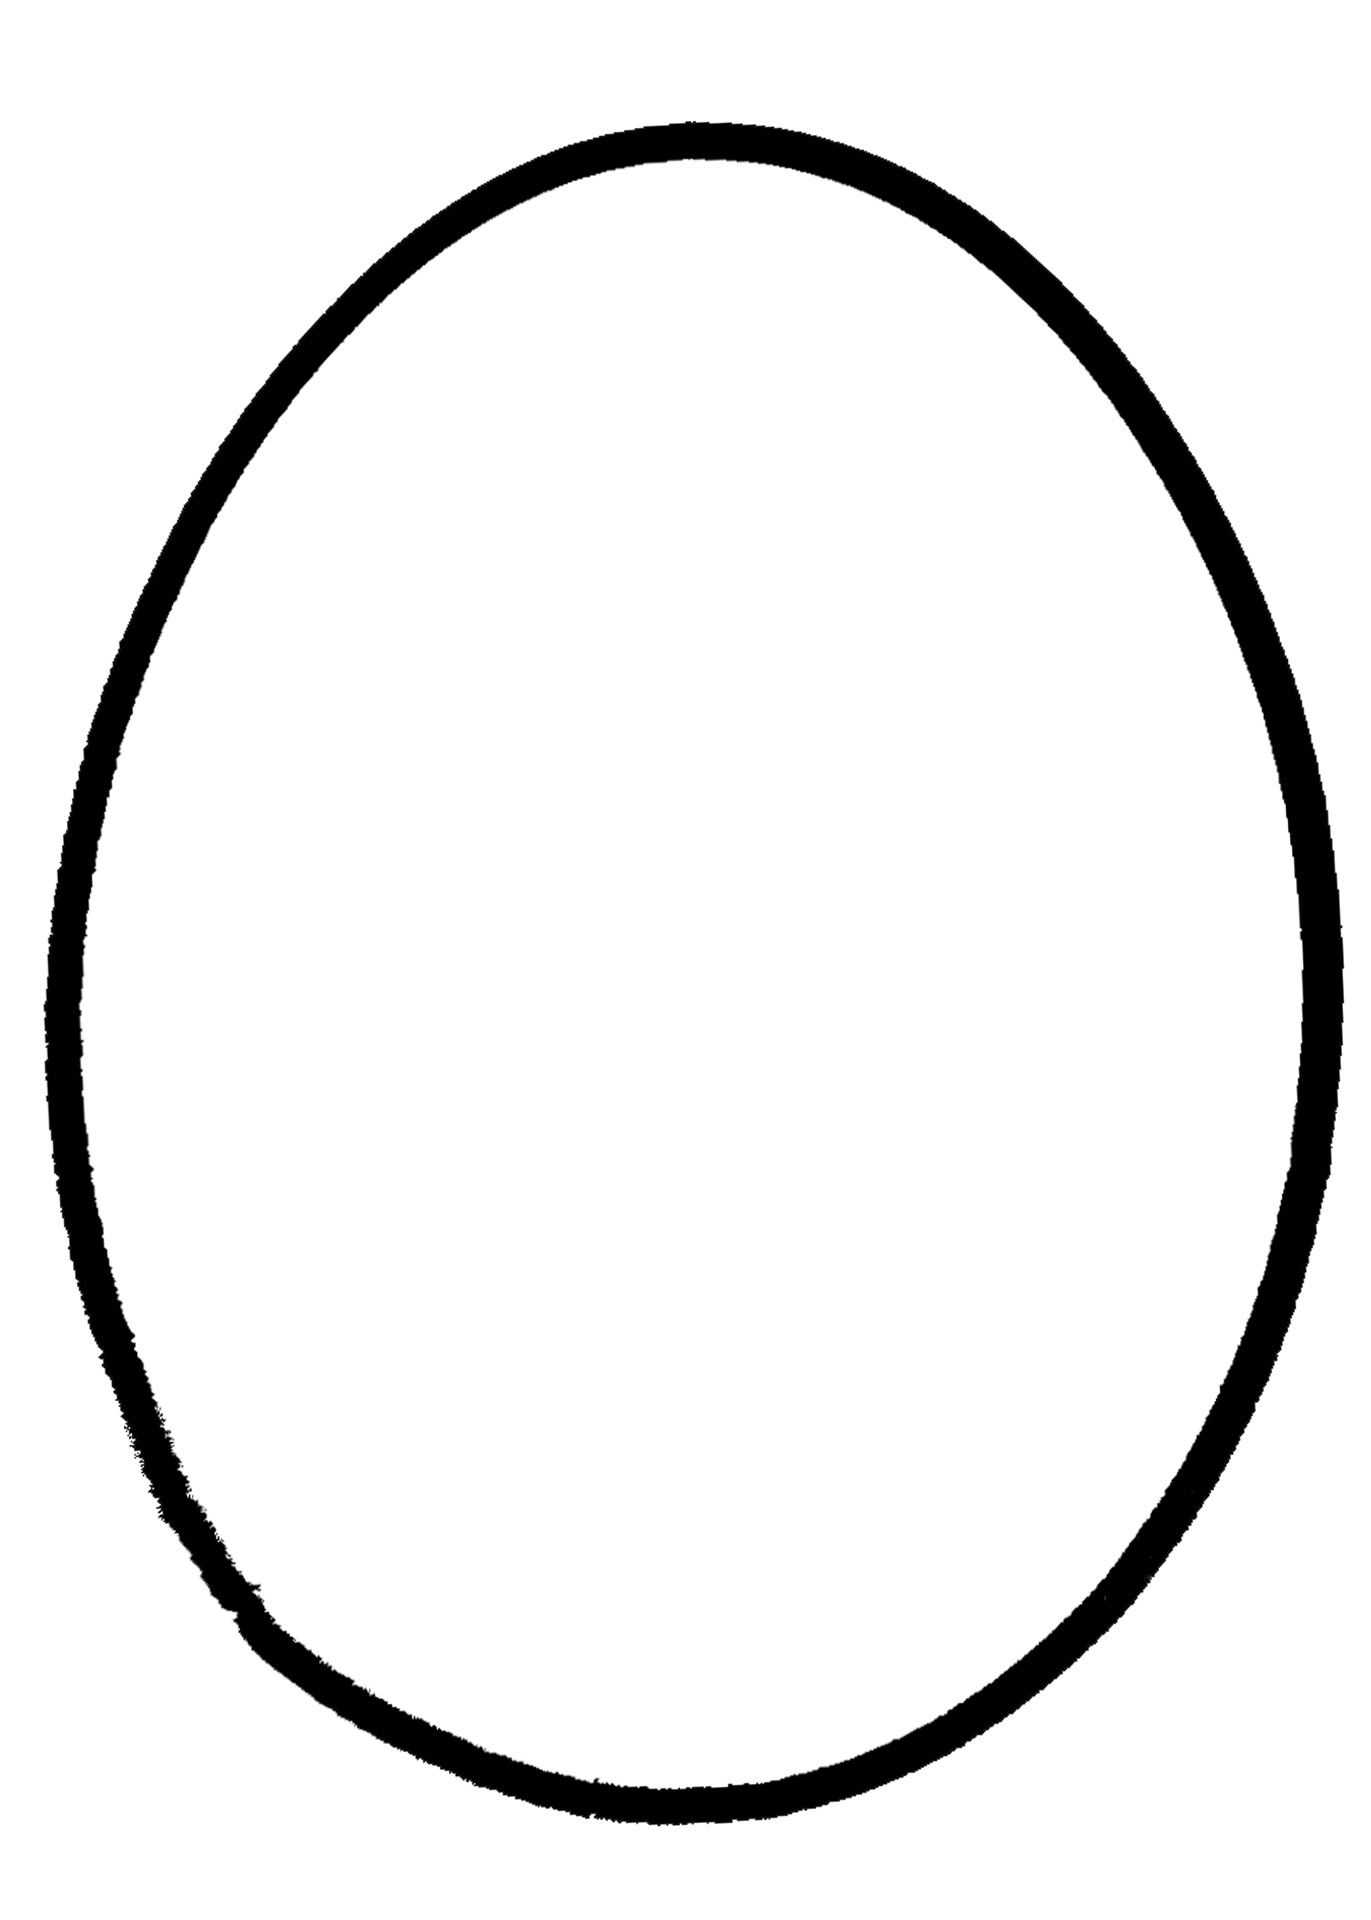 basic-egg-outline-free-stock-photo-public-domain-pictures